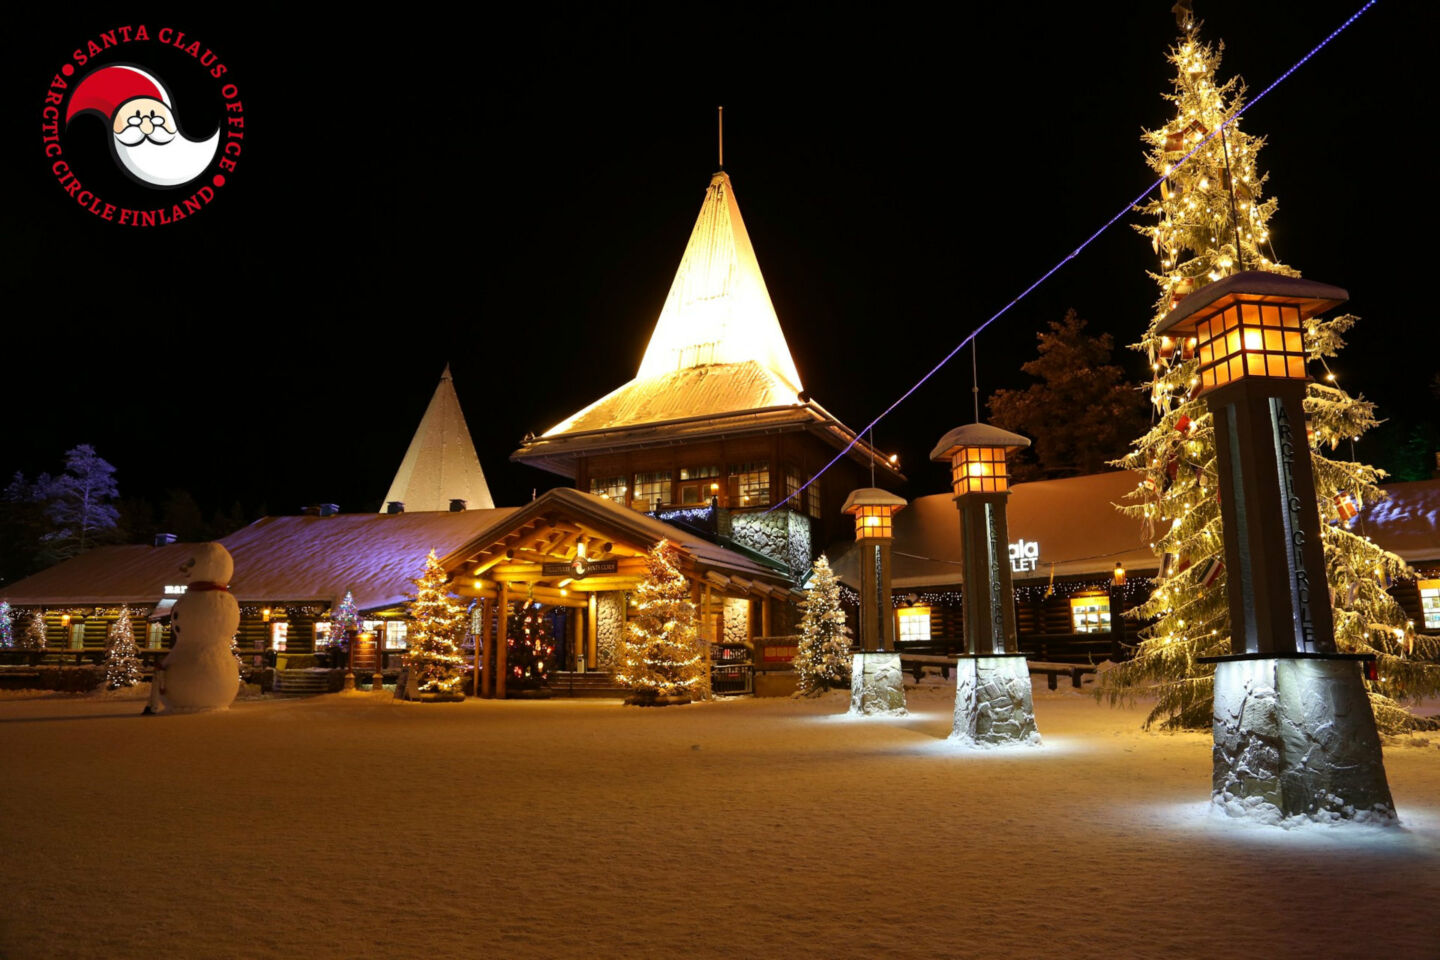 The Arctic Circle leading to Santa Claus Office in Santa Claus Village